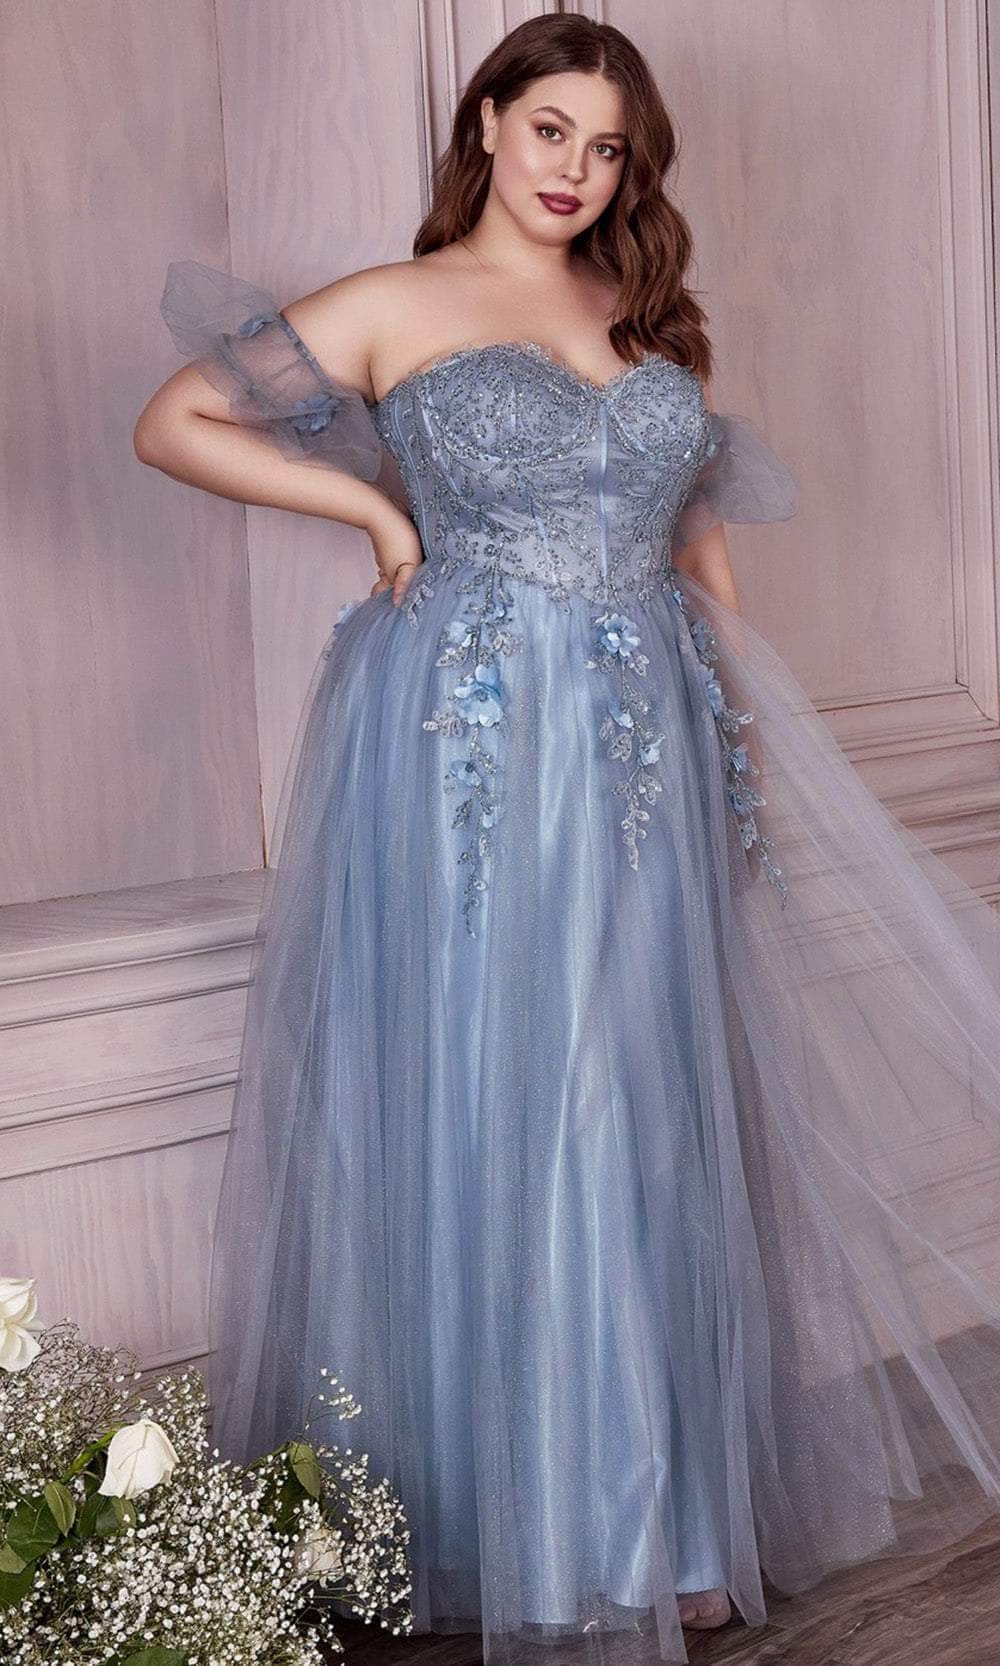 Ladivine CD0191C - Sweetheart A-Line Prom Dress Special Occasion Dresses